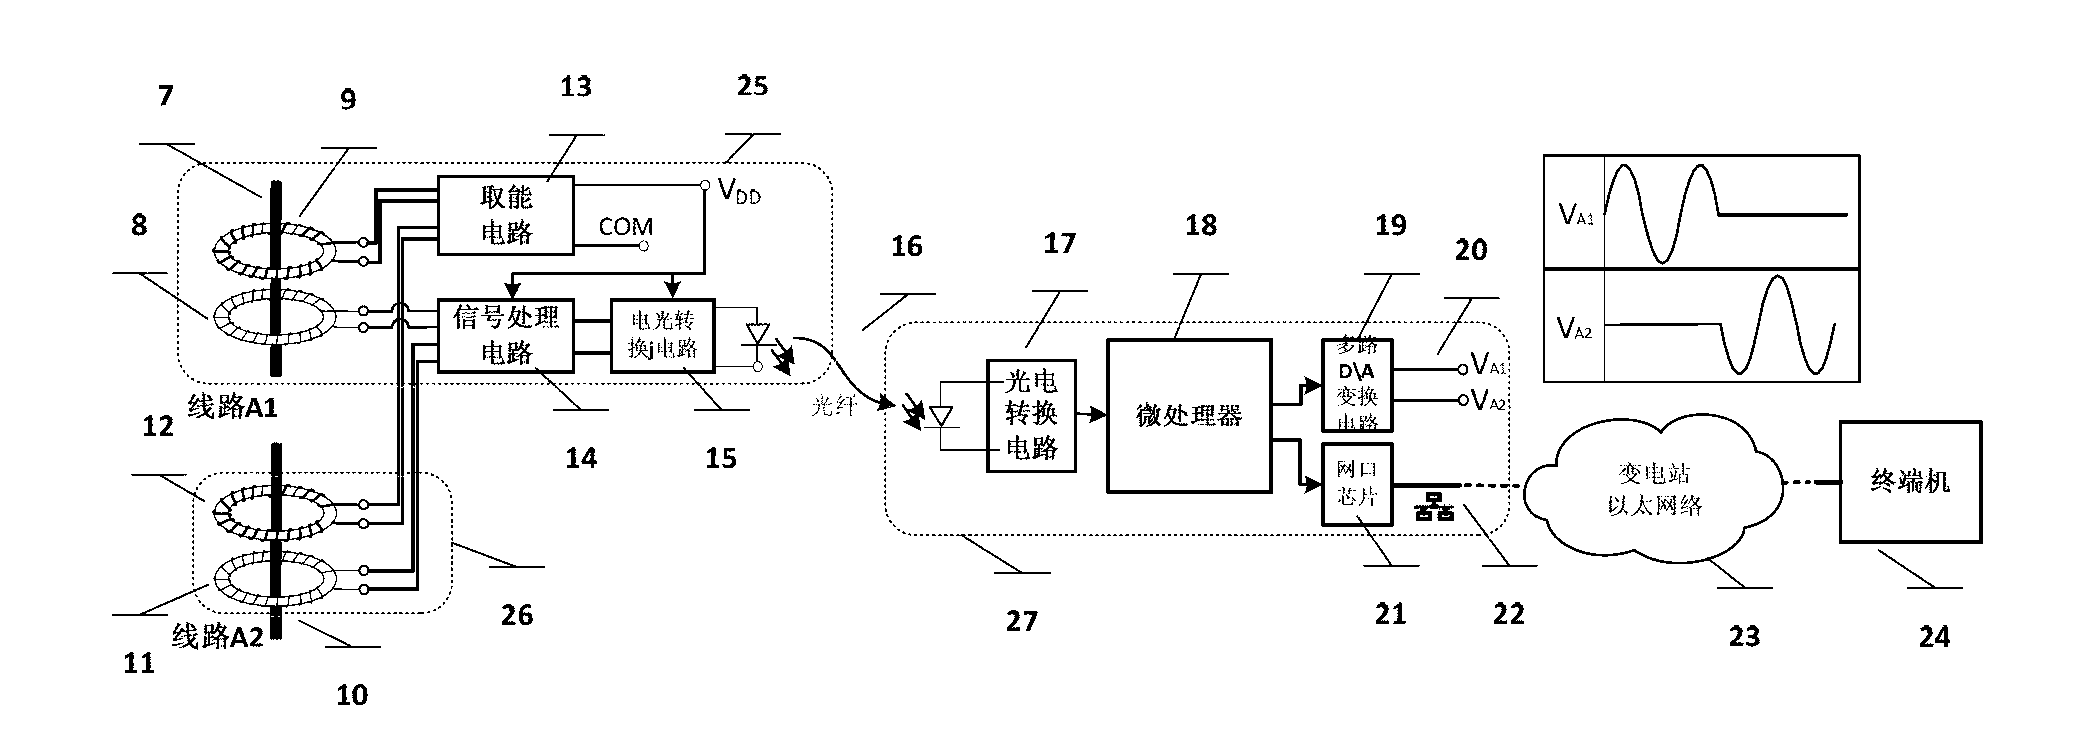 Current online monitoring integrated system of on-load tap changer